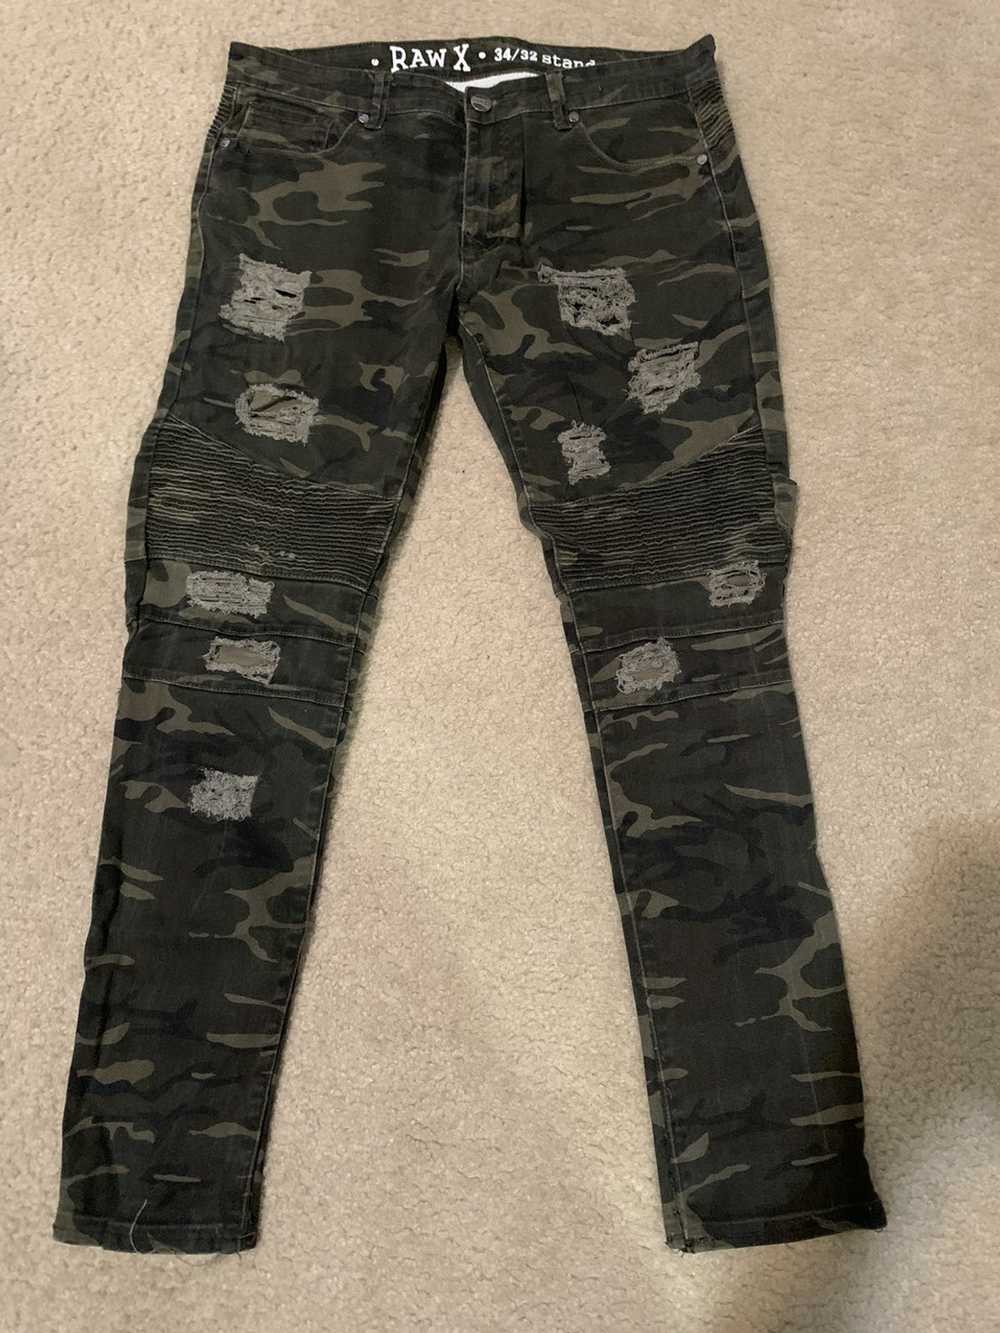 Other Raw X camo jeans - image 2